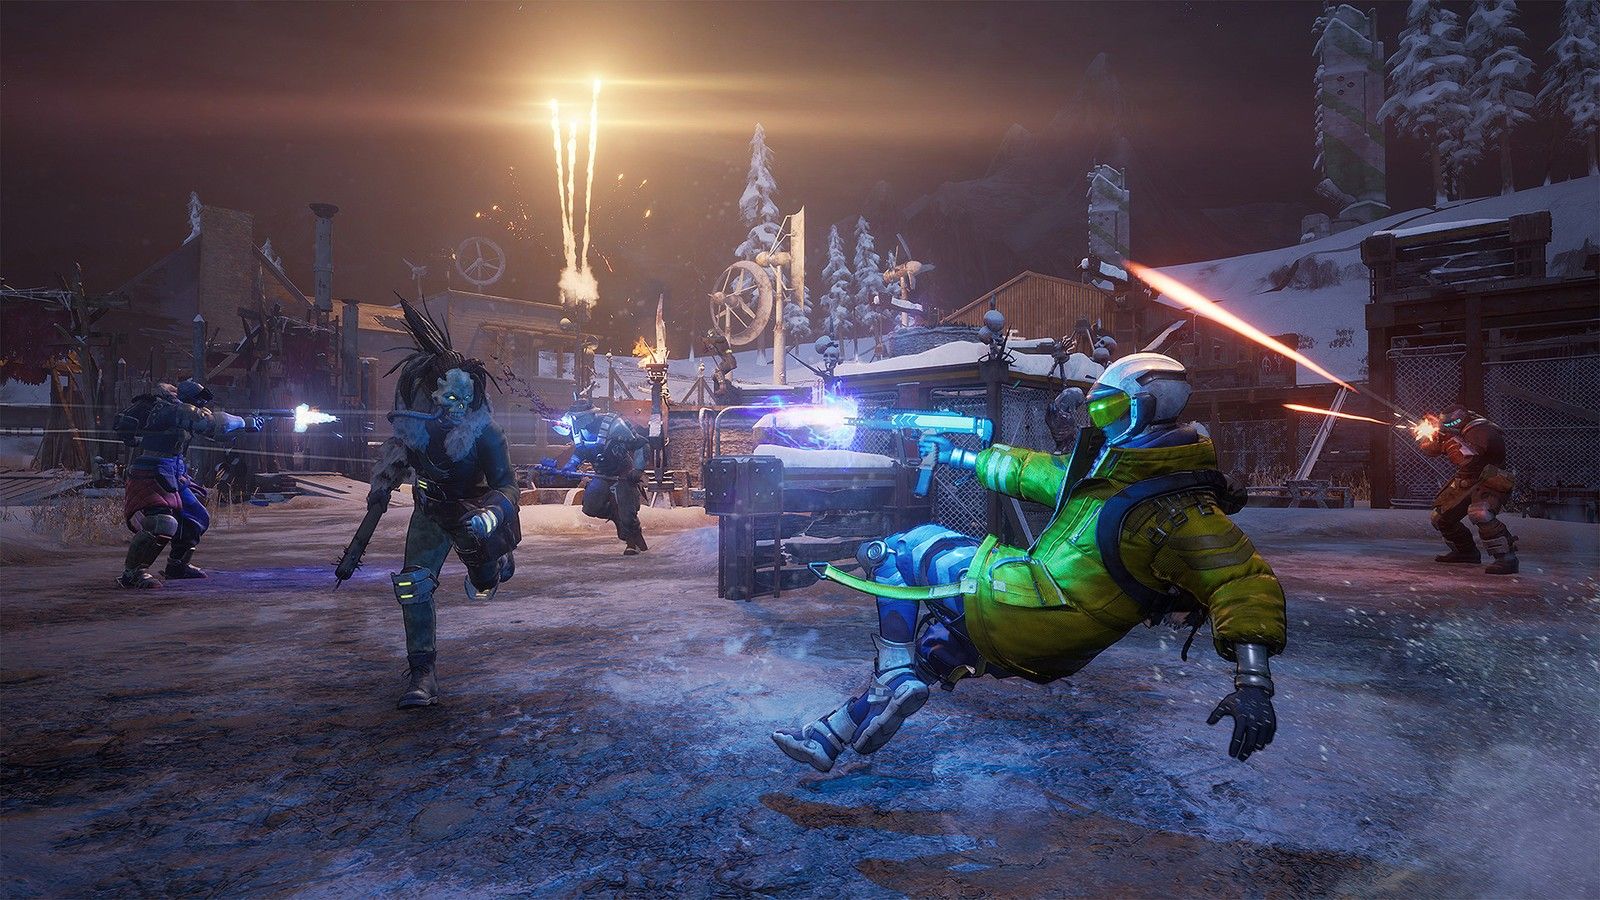 Scavengers interview: Midwinter devs talk getting inspired by Halo, blending genres